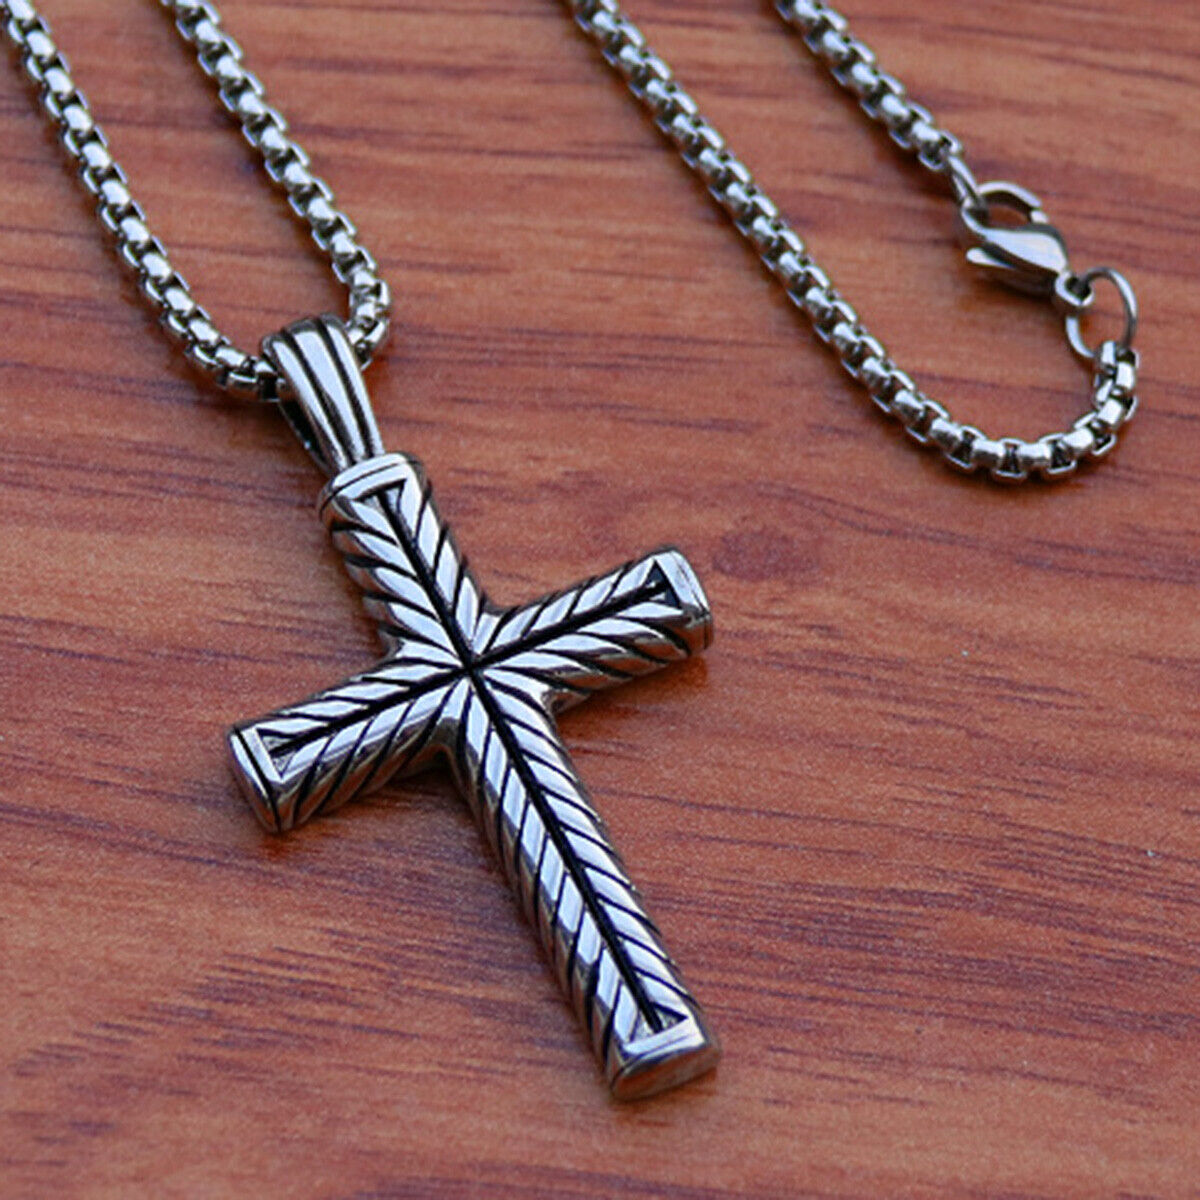 Men Women Vintage Crufifix Cross Charm Pendant Necklace Stainless Steel Silver